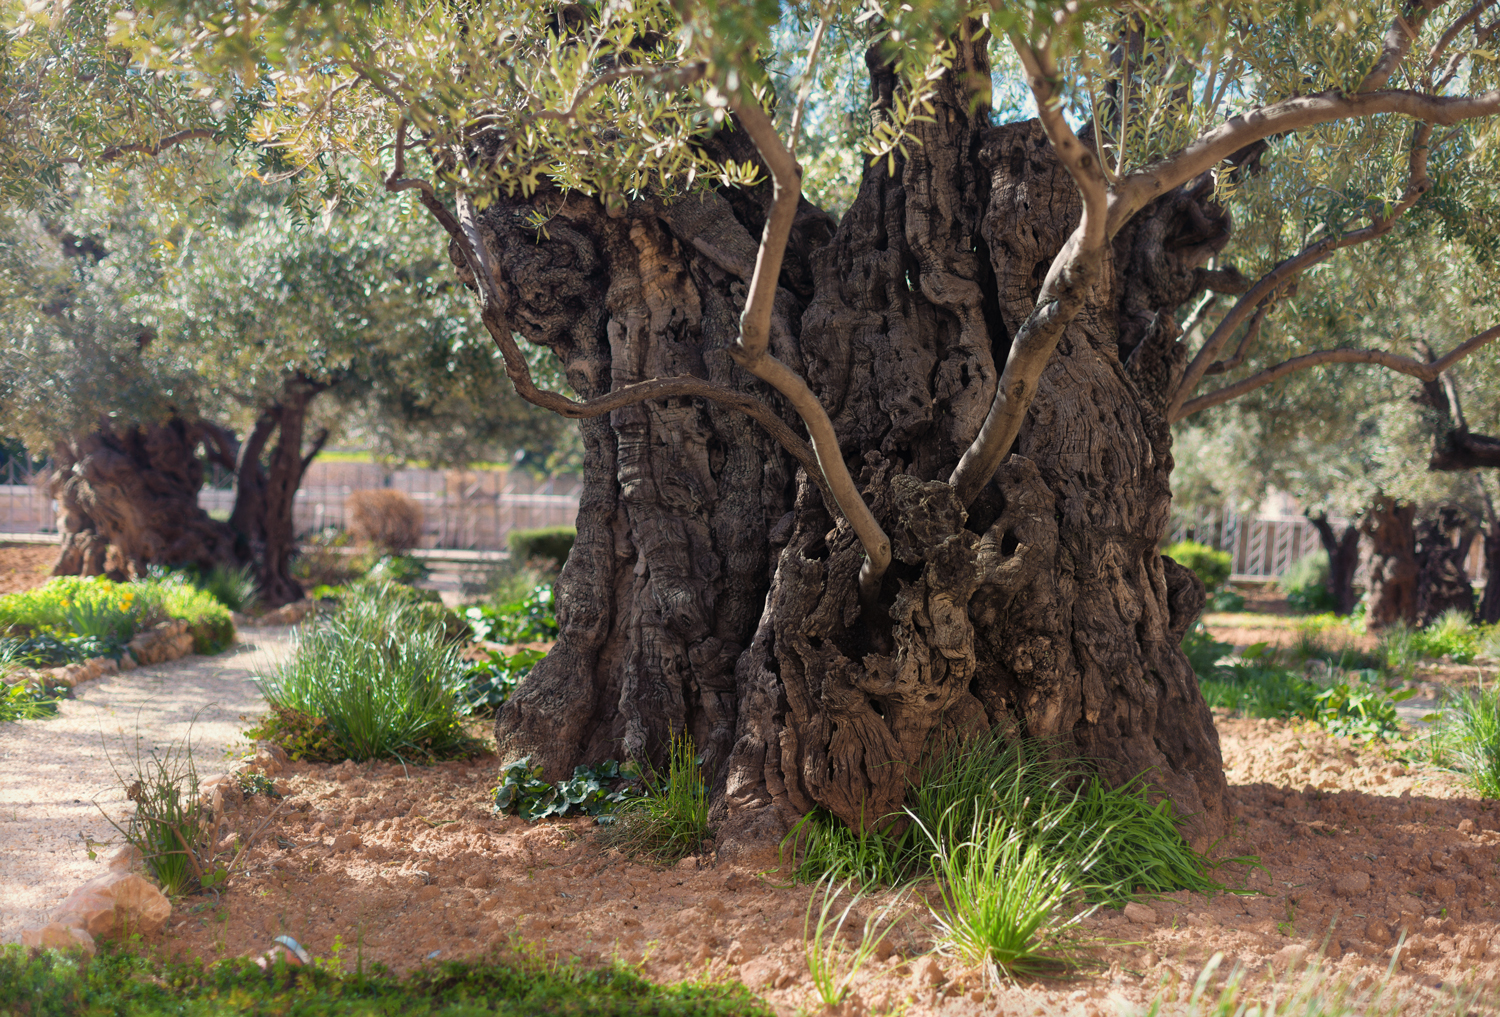  An old olive tree in the Garden of Gethsemane. 